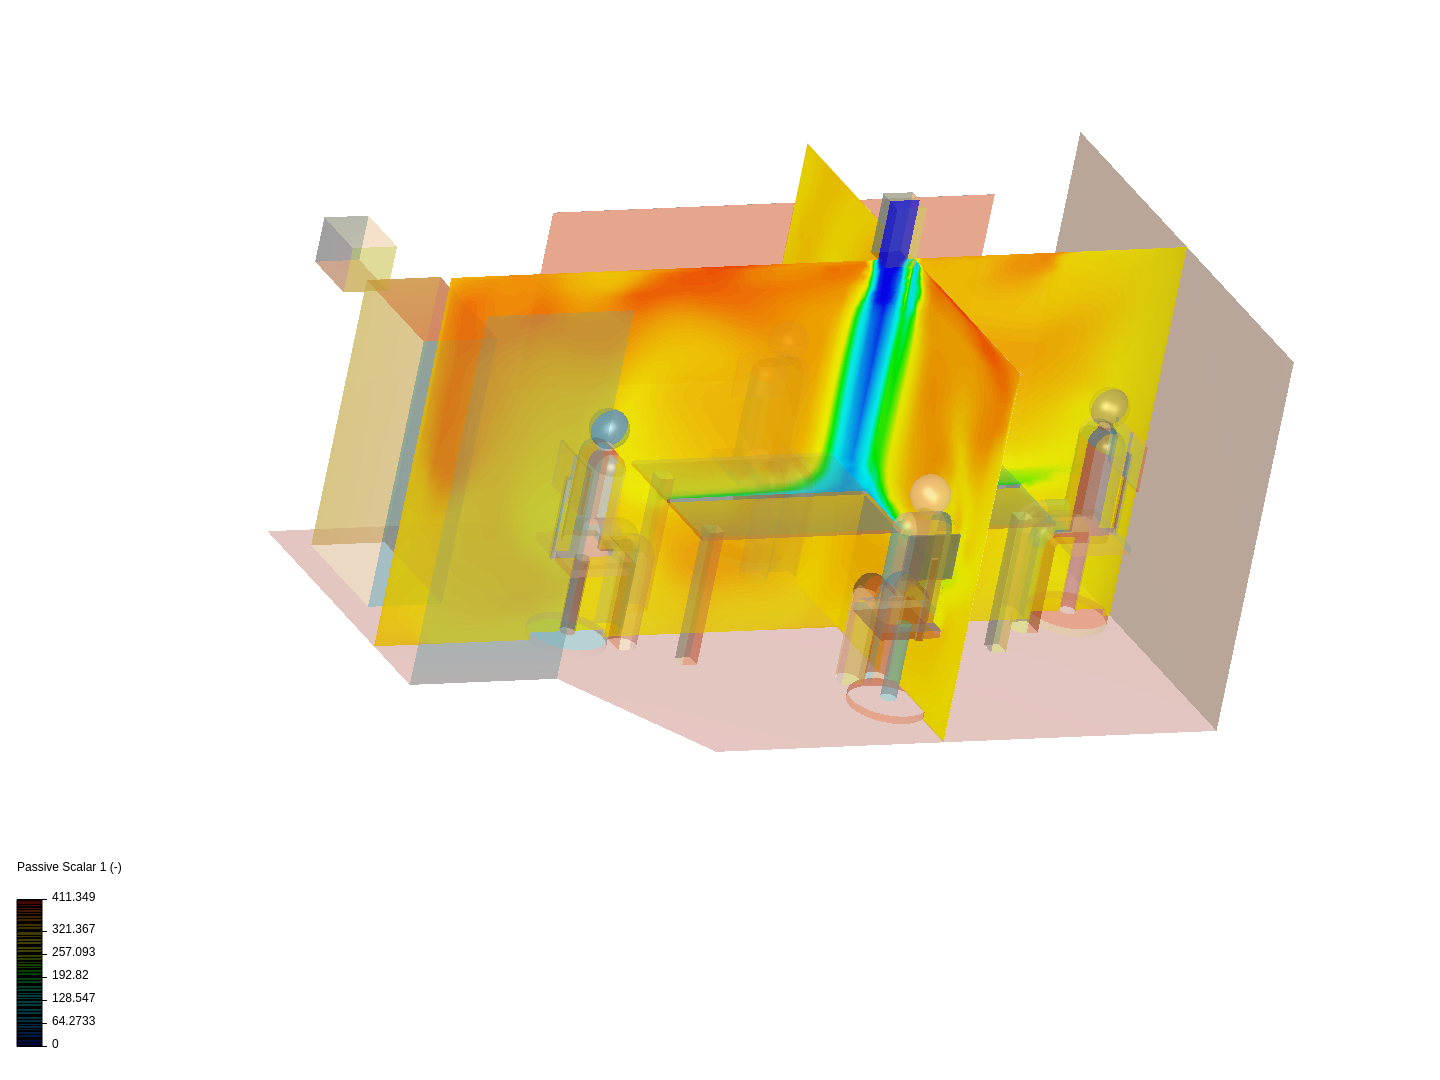 Thermal comfort in a office environment image